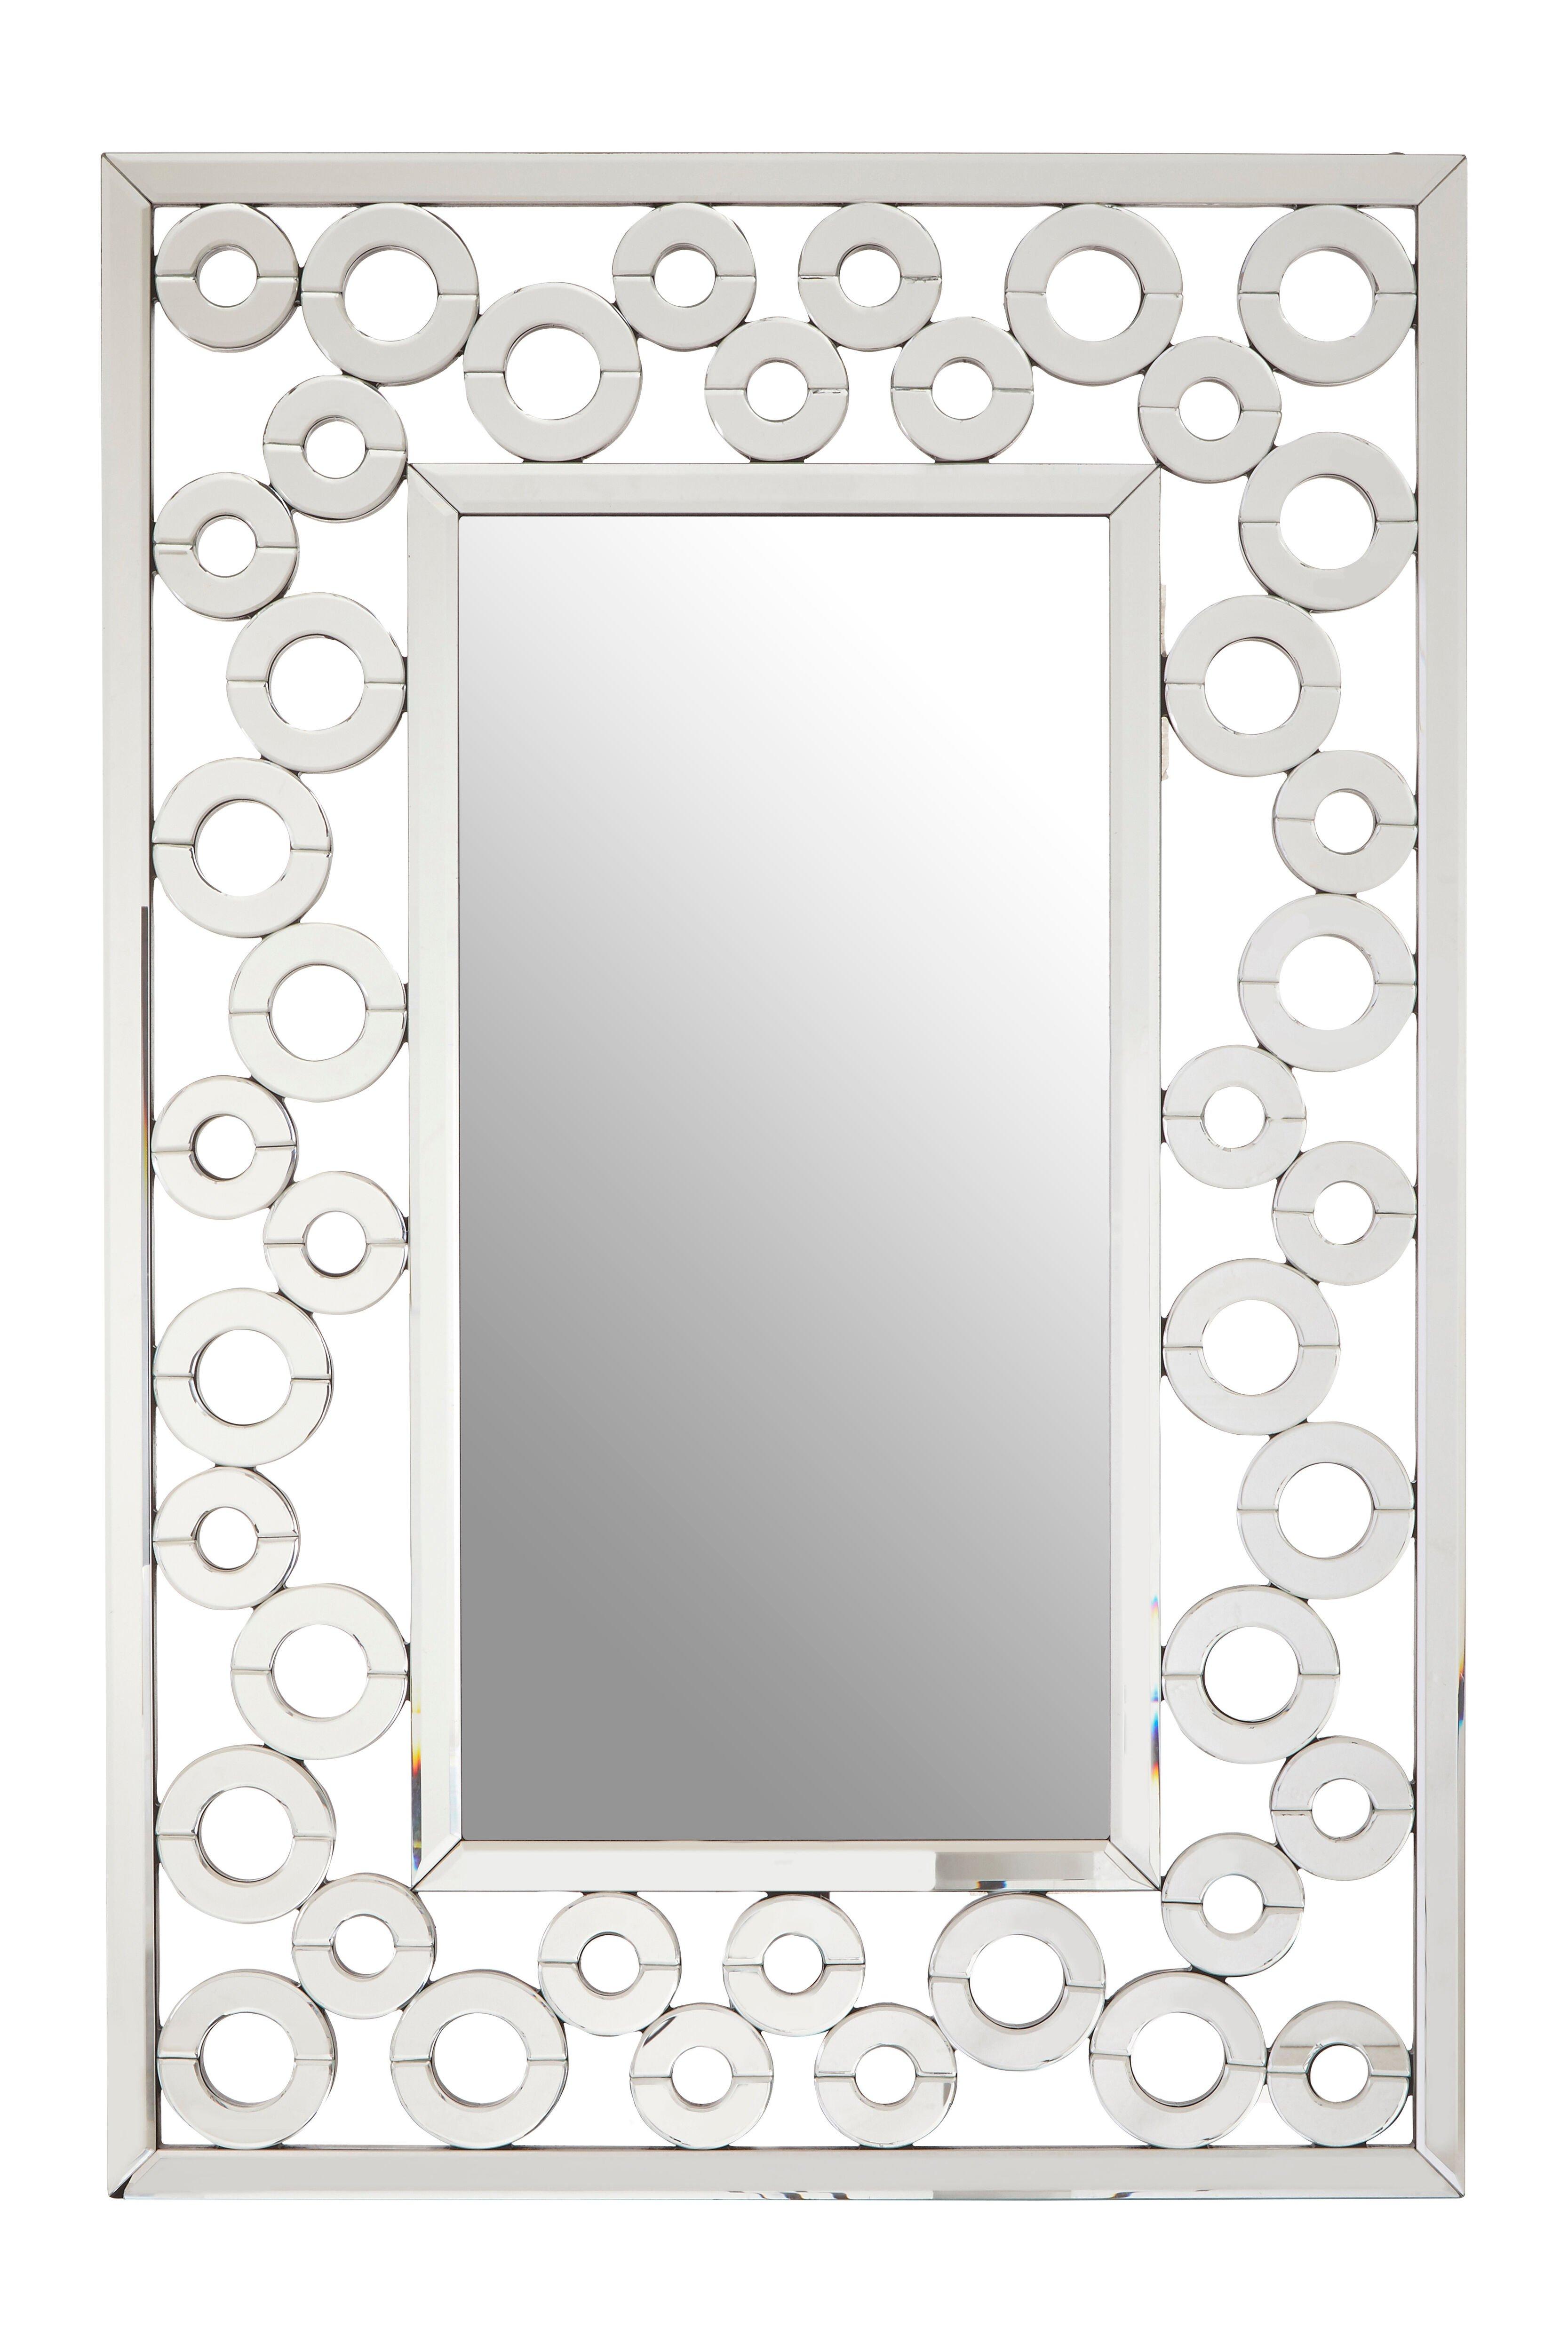 Puzzle Wall Mirror with Scrolled Frame